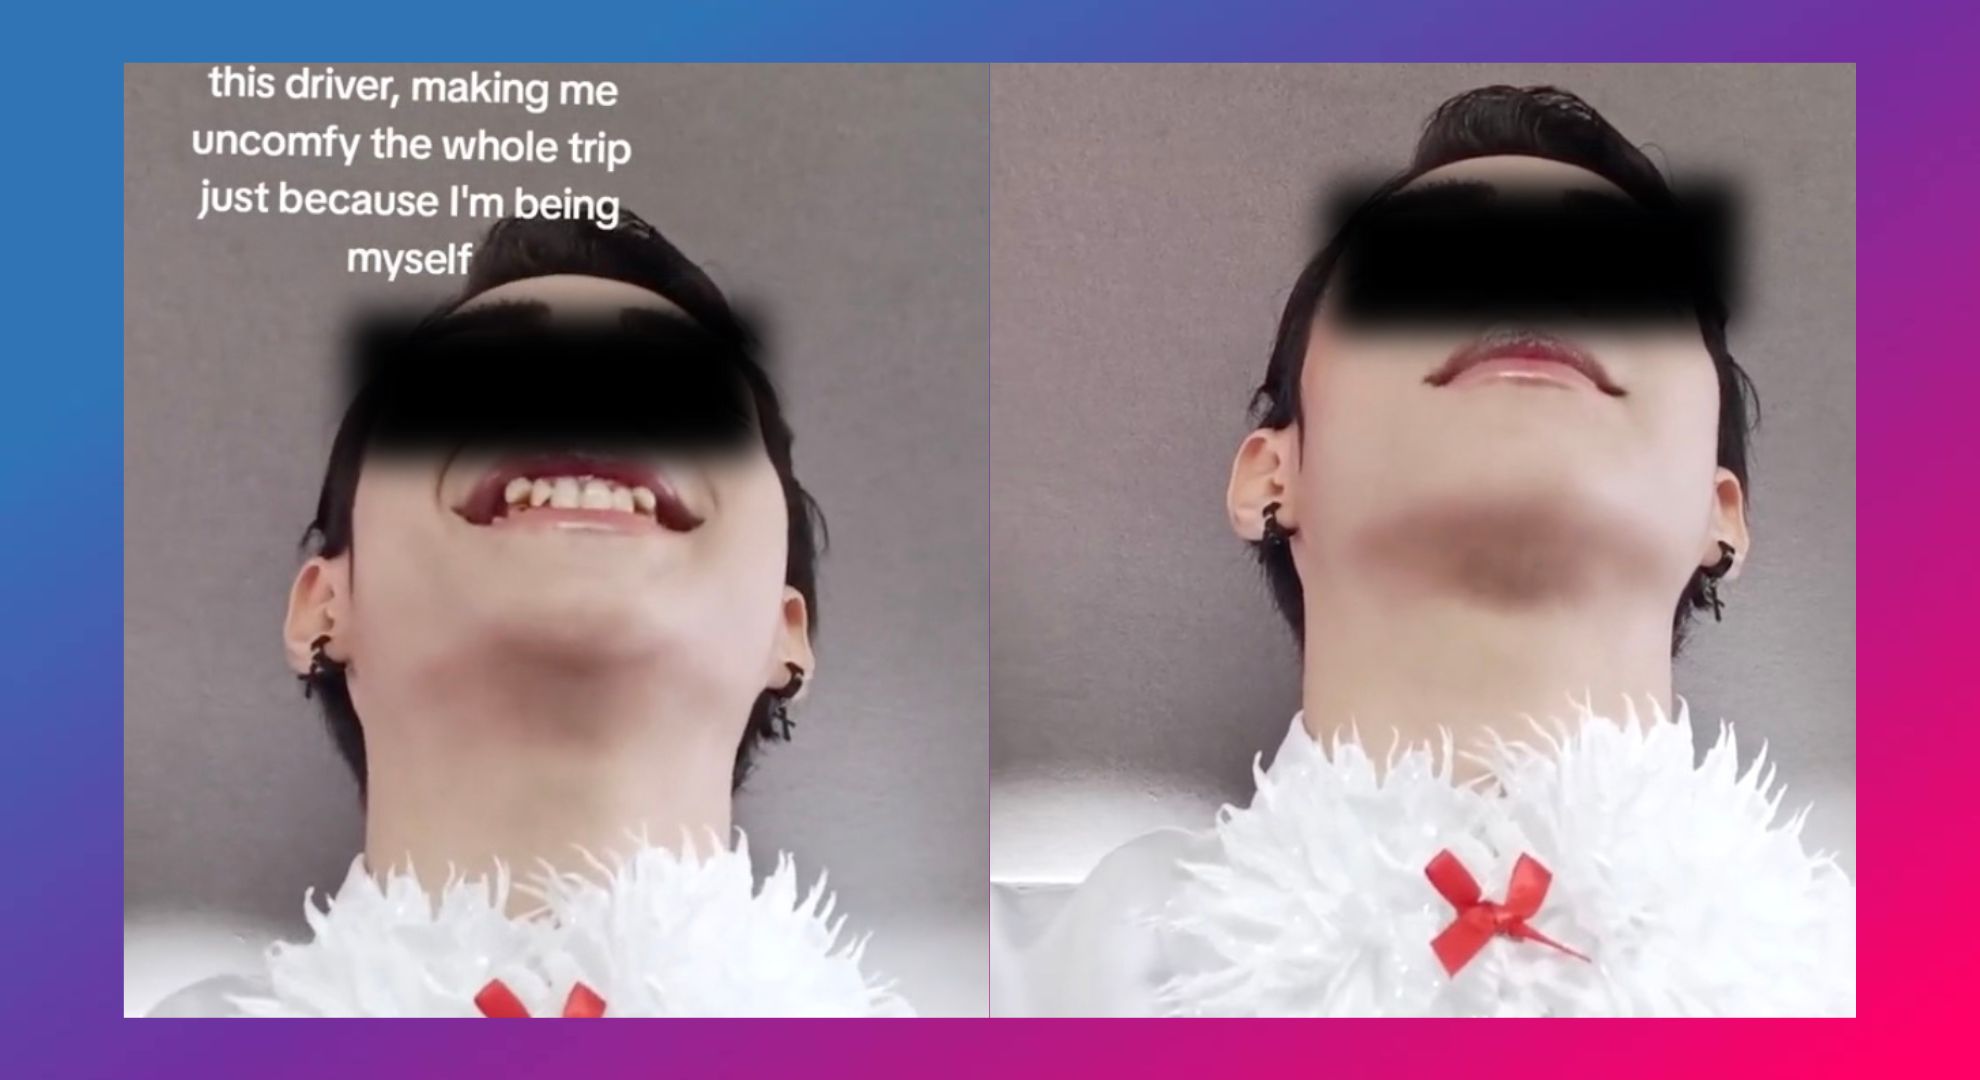 Ride-hailing driver preaches religion to a queer passenger, goes viral on TikTok